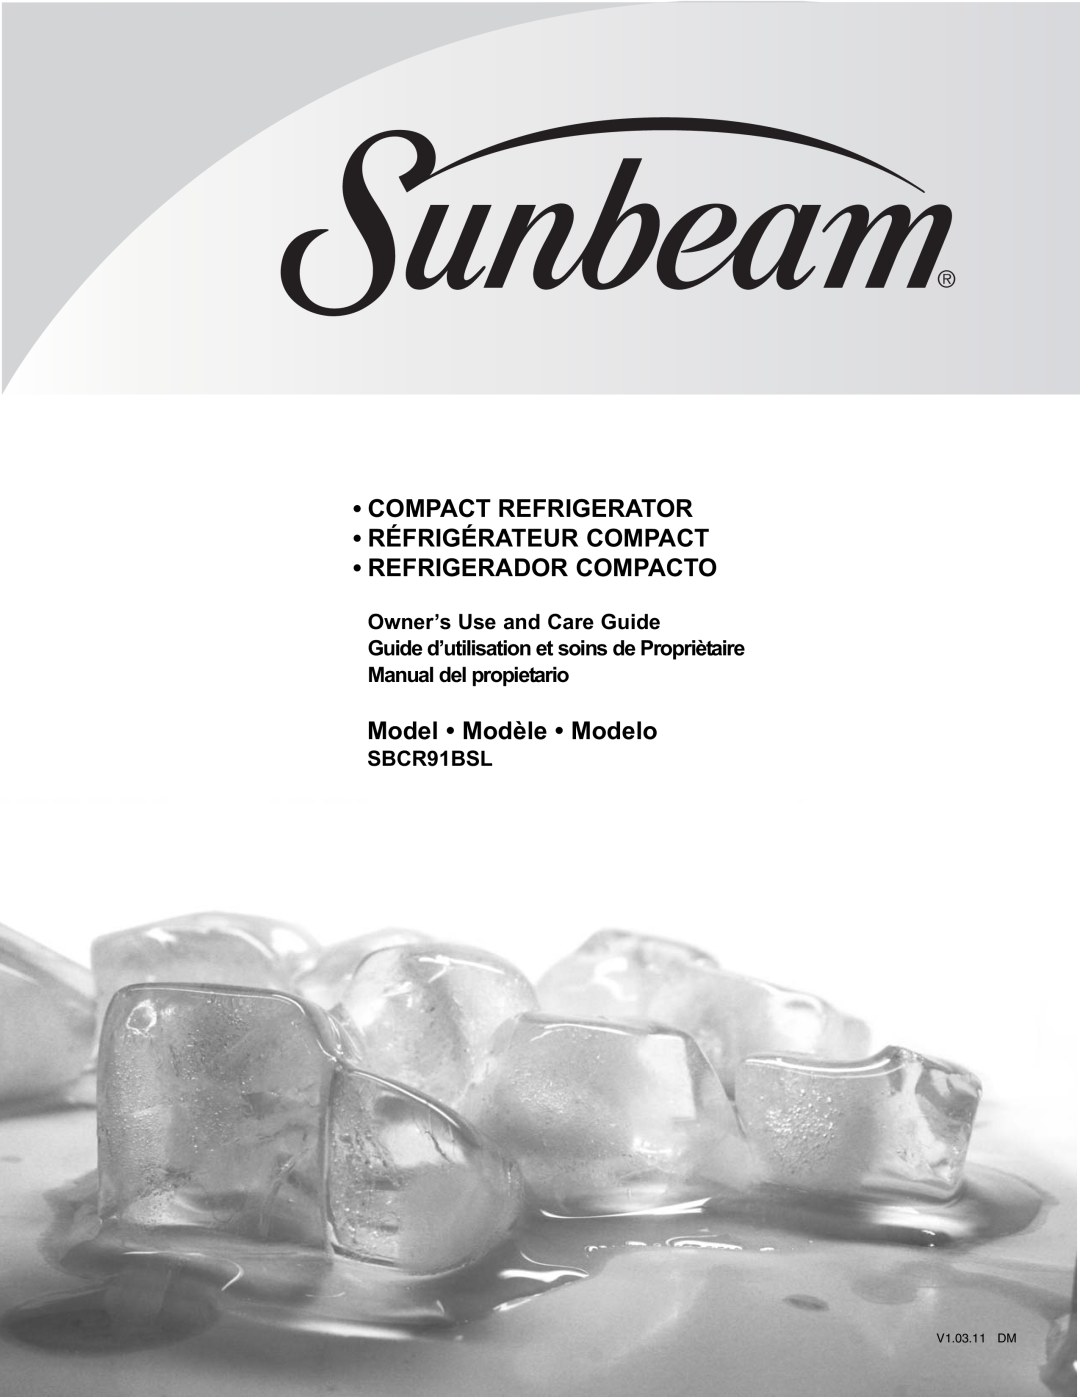 Sunbeam SBCR91BSL manual Owner’s Use and Care Guide, •Compact Refrigerator •Réfrigérateur Compact, Refrigerador Compacto 